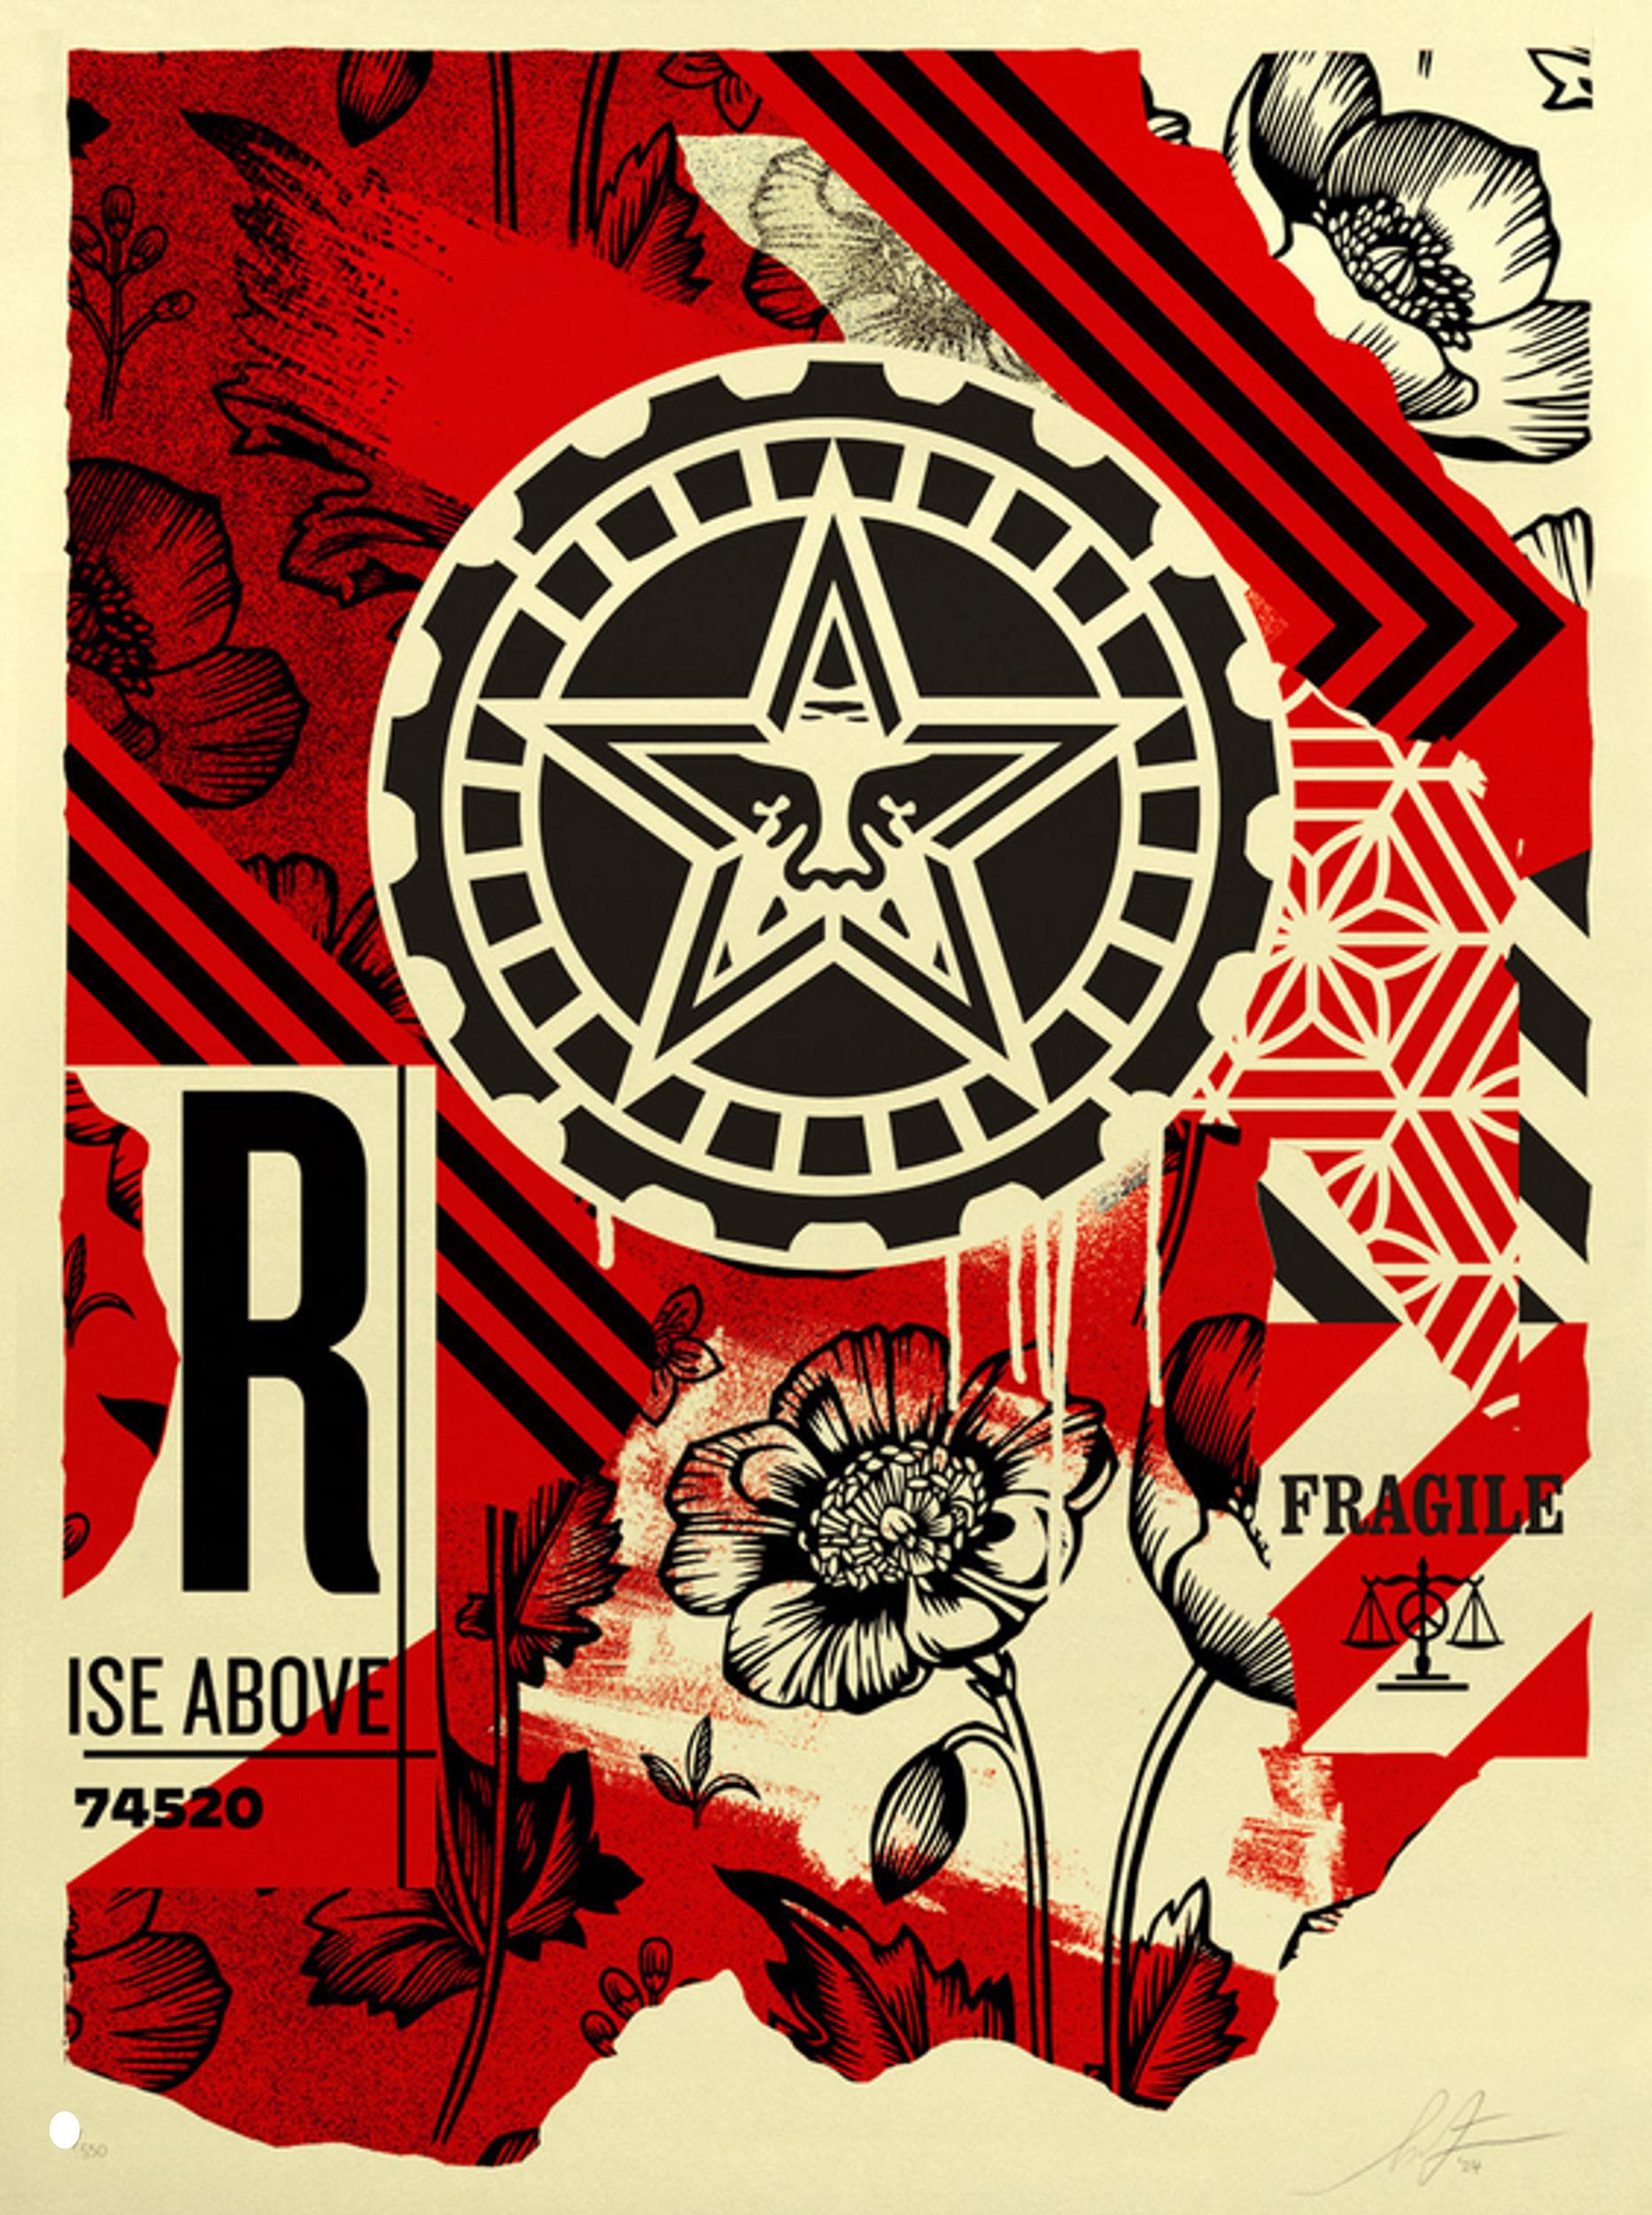 Gears of Justice (Empowerment, Industrious, Leveling playing field, ~35% OFF) - Print by Shepard Fairey